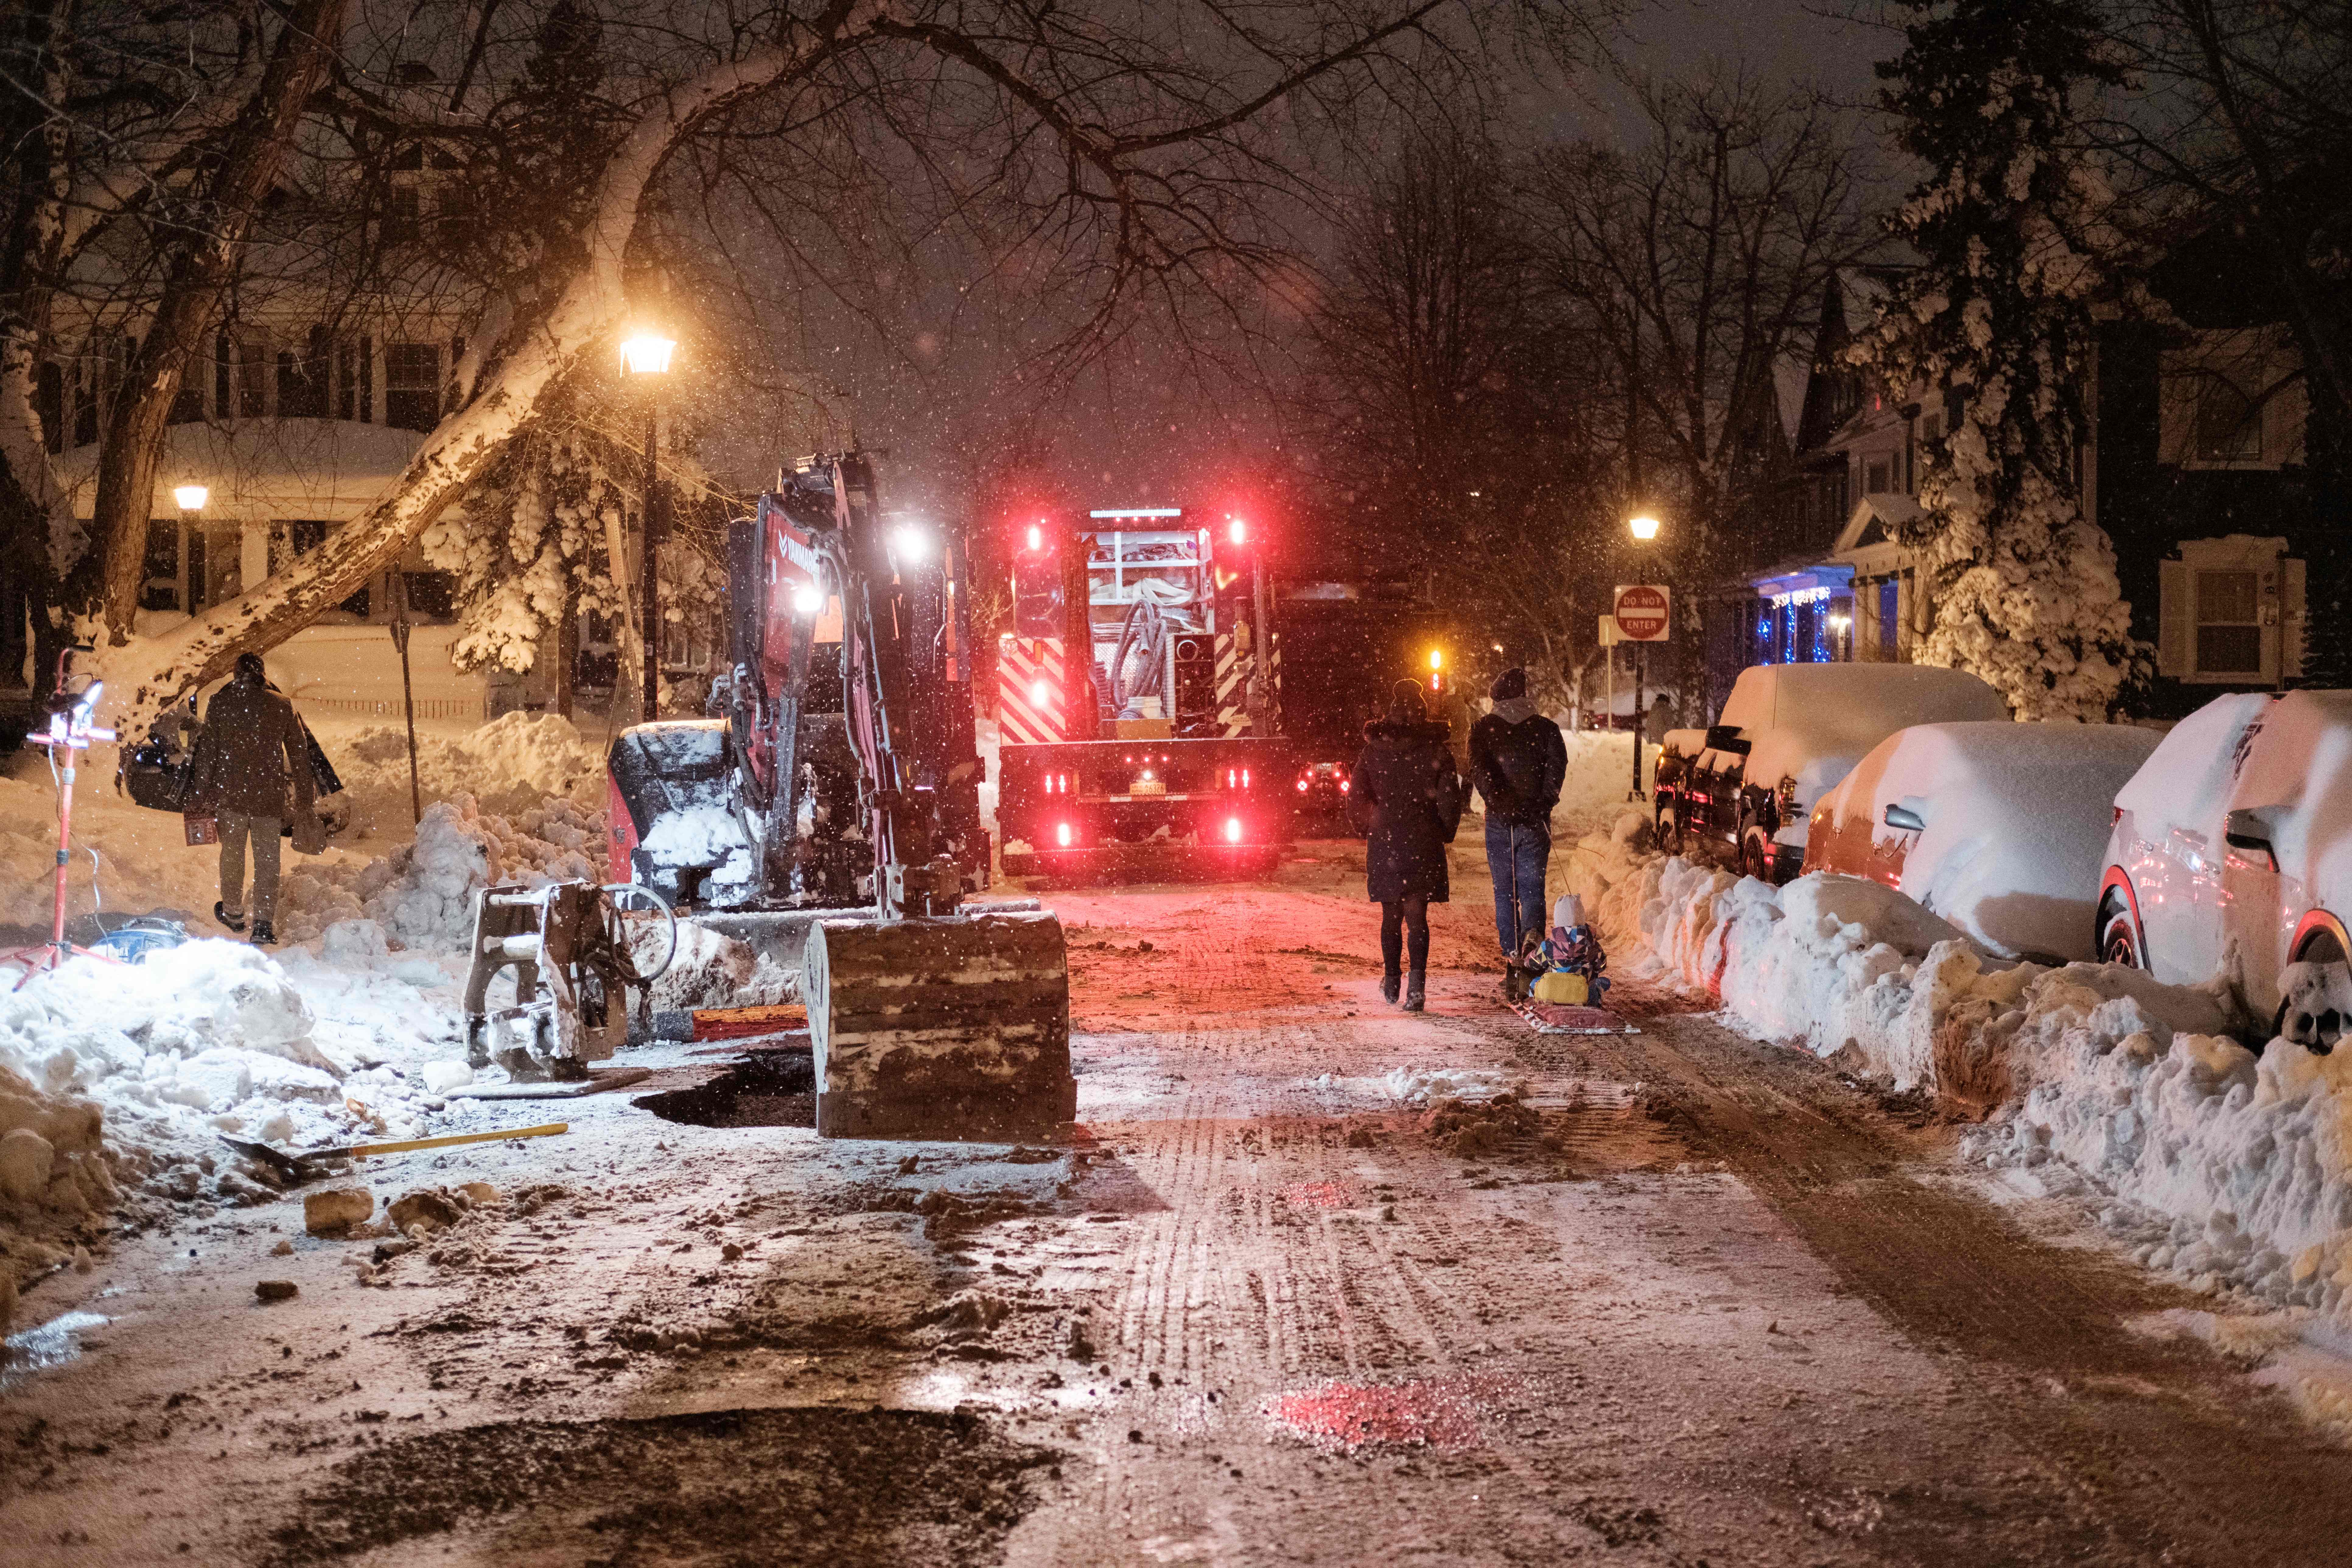 Repair vehicles and workers on a snowy street after dark.